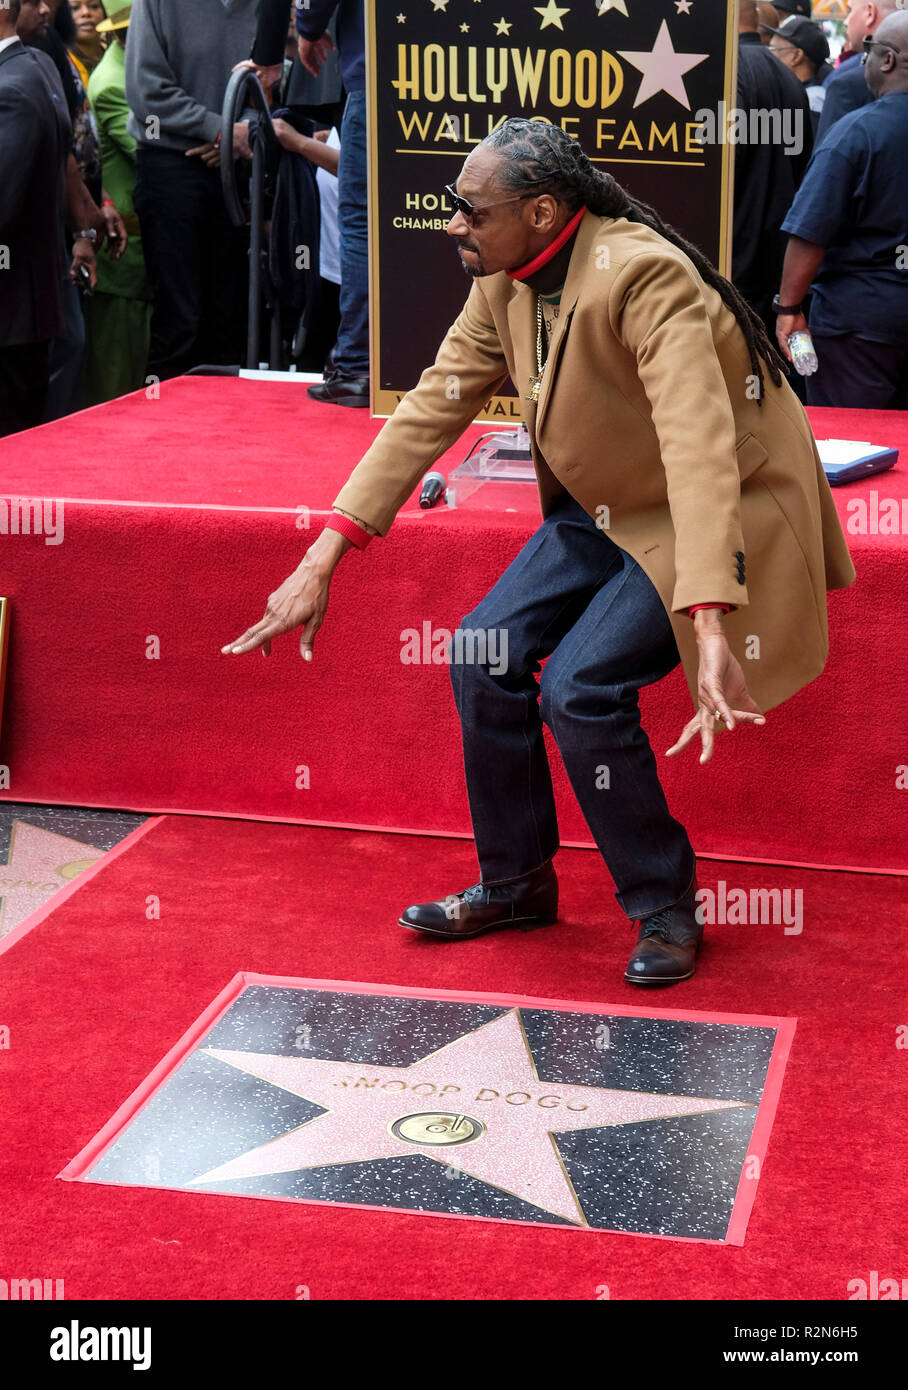 Los Angeles, USA. 19th Nov, 2018. Rapper Snoop Dogg attends a ceremony honoring him with a star on the Hollywood Walk of Fame in Los Angeles, the United States, on Nov. 19, 2018. Credit: Zhao Hanrong/Xinhua/Alamy Live News Stock Photo